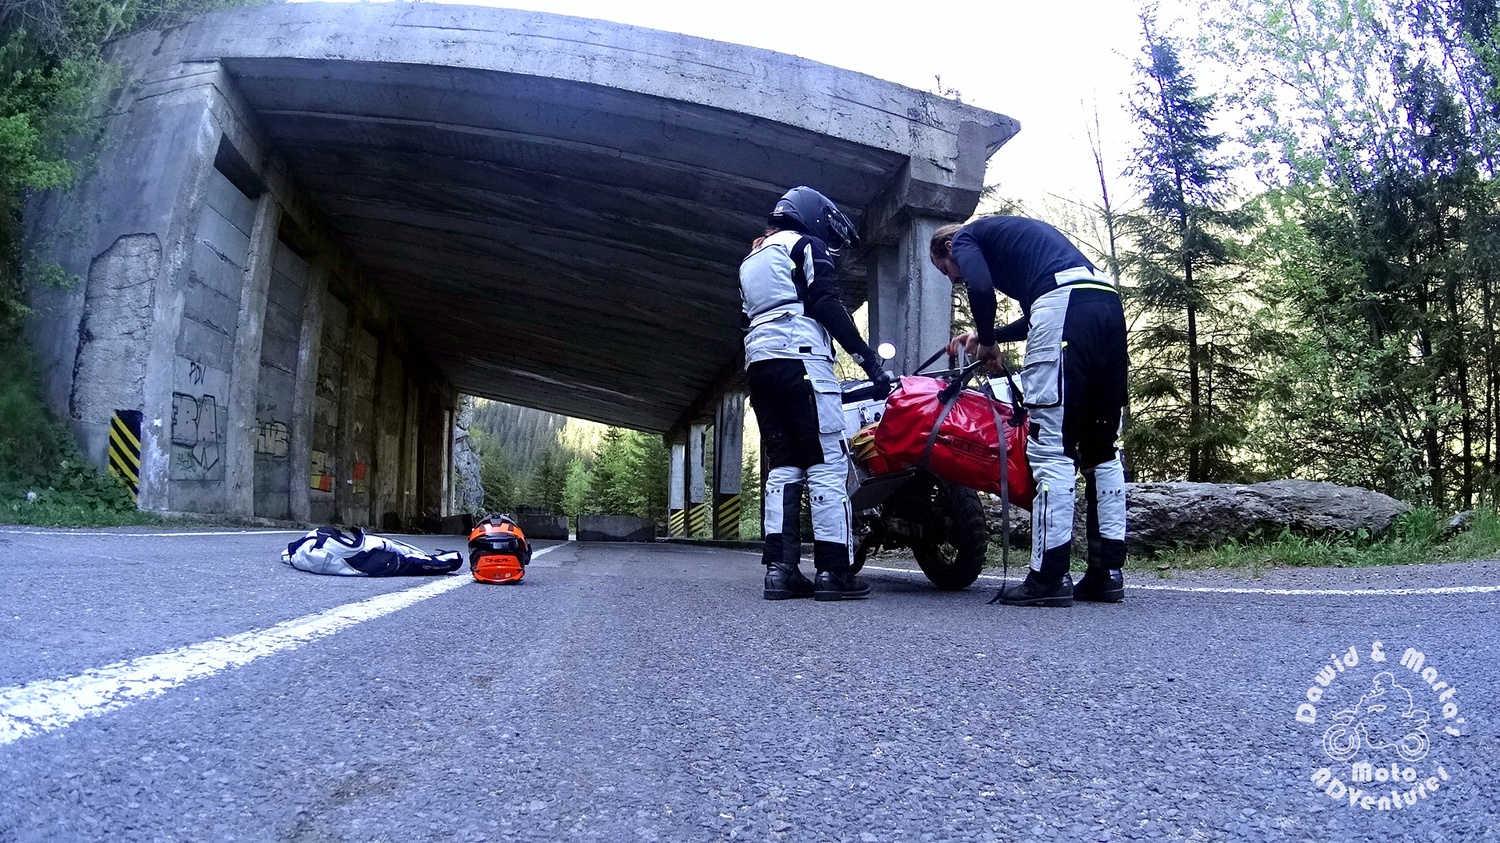 preparing For Rolling Out From Transfagarasan